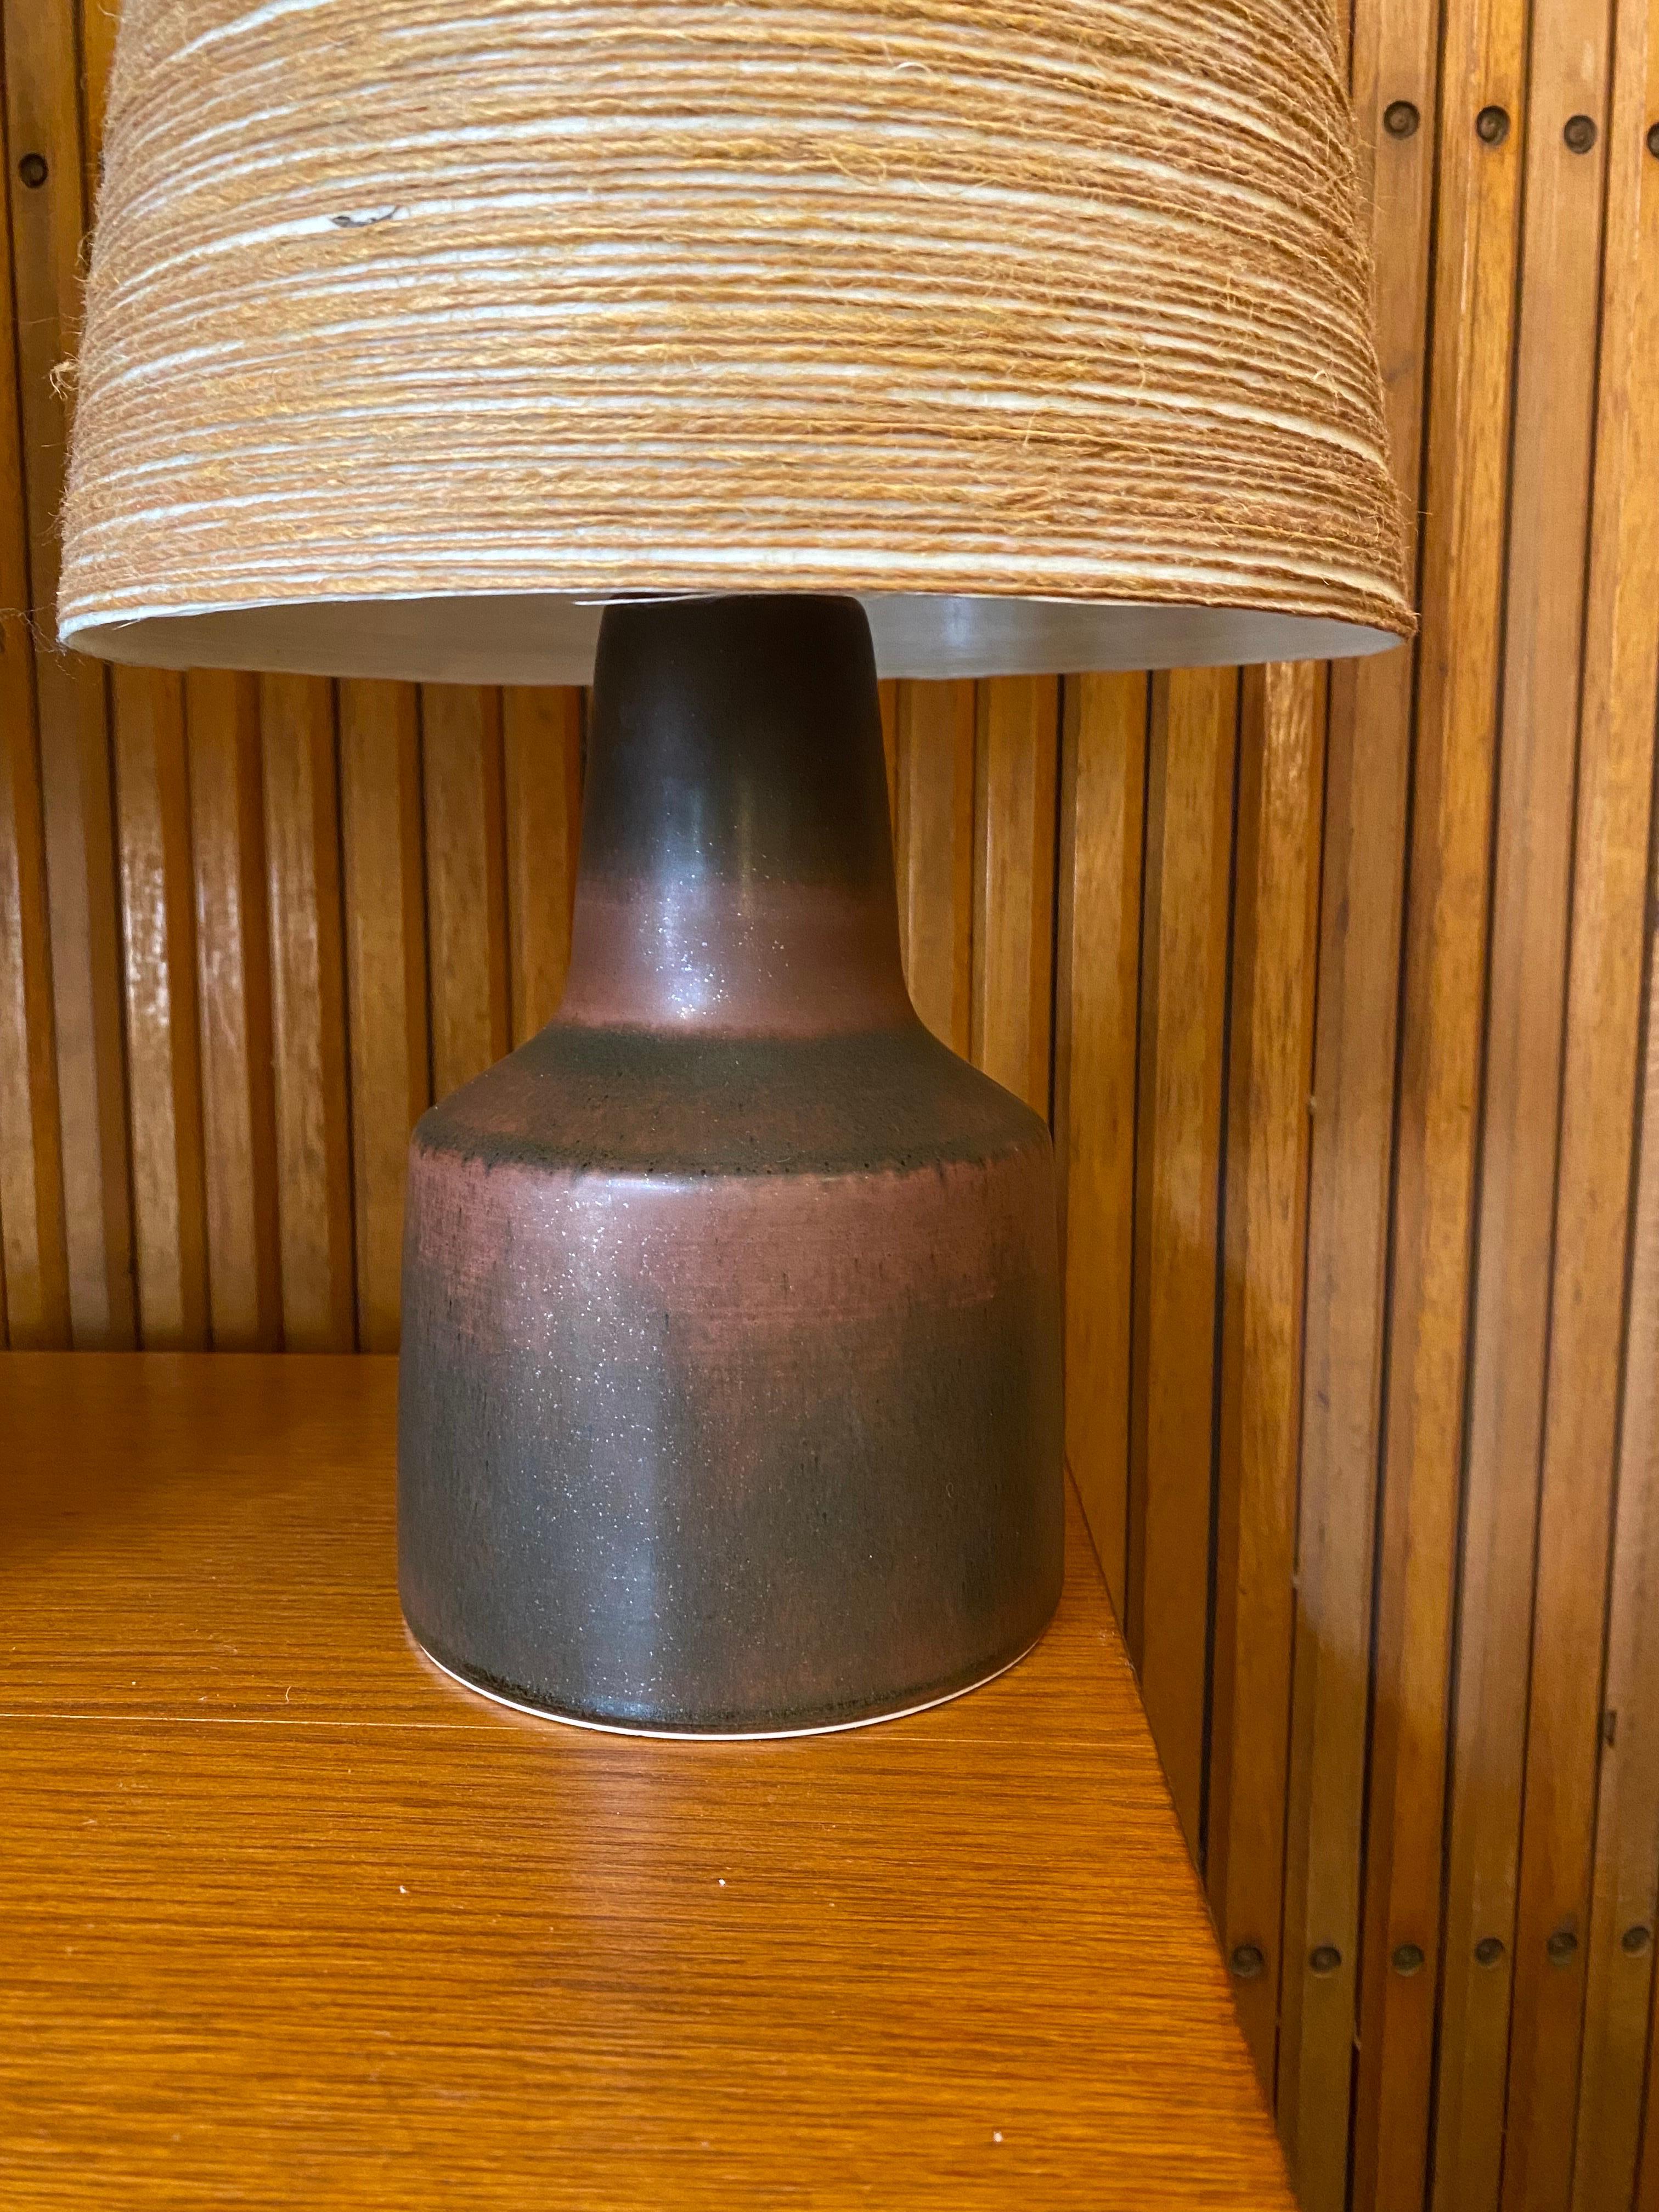 Pair of Lotte and Gunnar Bostlund Table lamps with their Original shades!  Fiberglass with wrapped string give an amazing quality of light!  Always a plus to find these with their original shades!  Ceramic bodies in very nice shape!